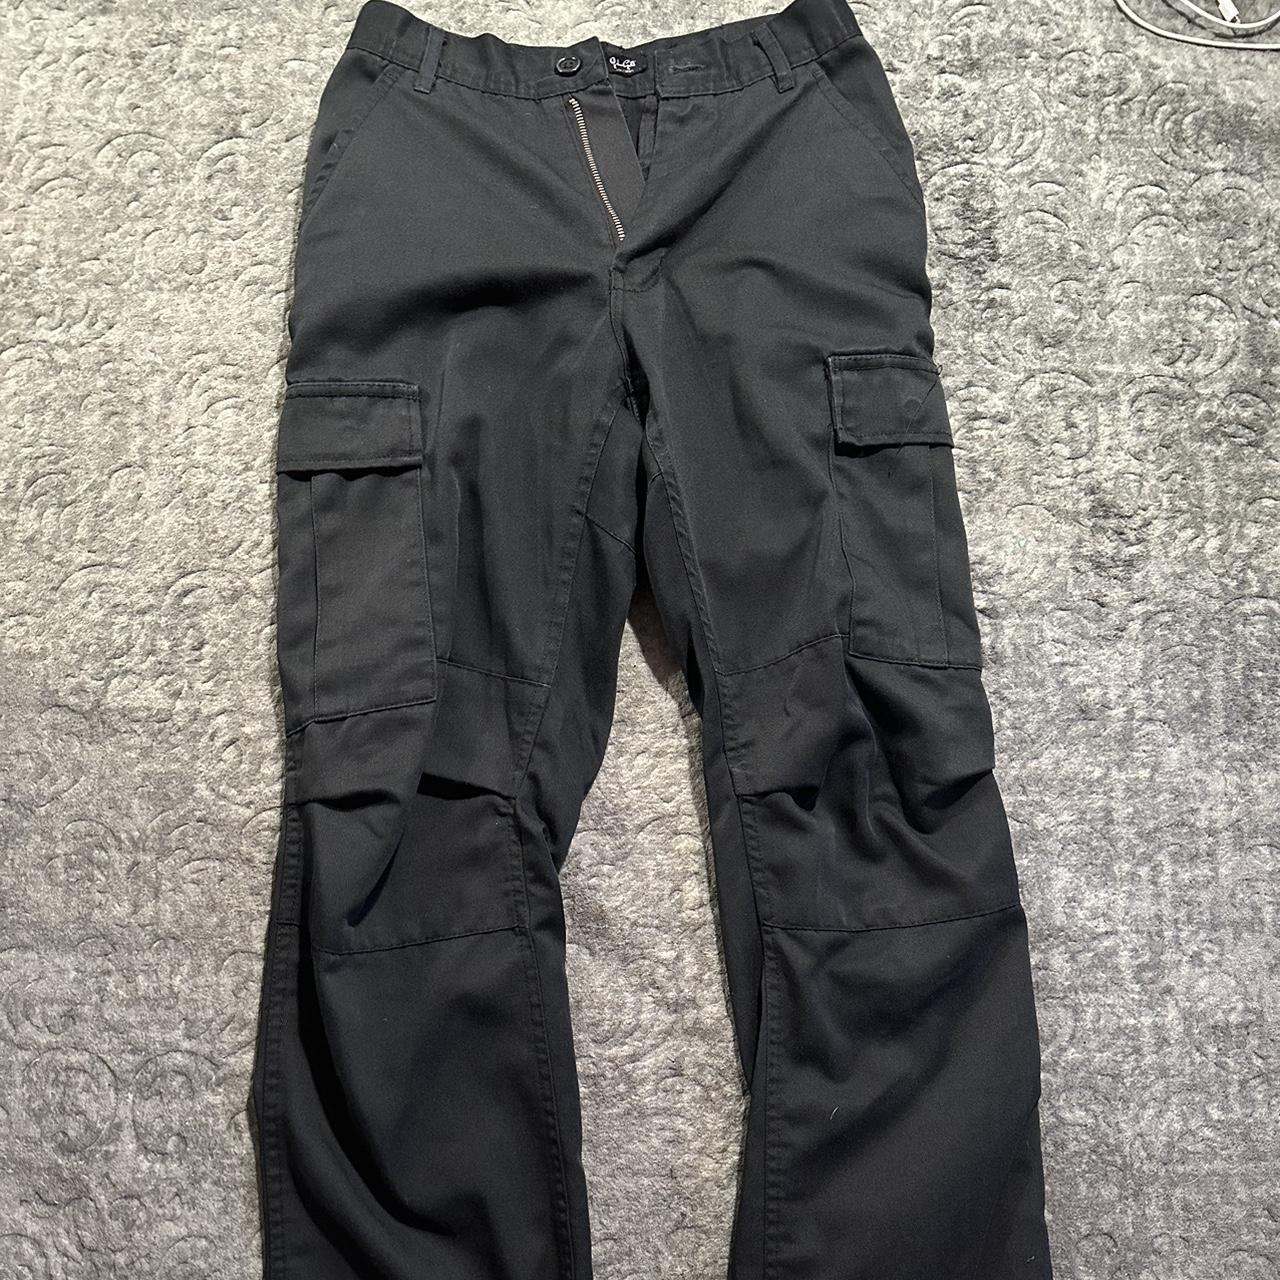 John Galt Cargo pants Size: Small Used to be my... - Depop